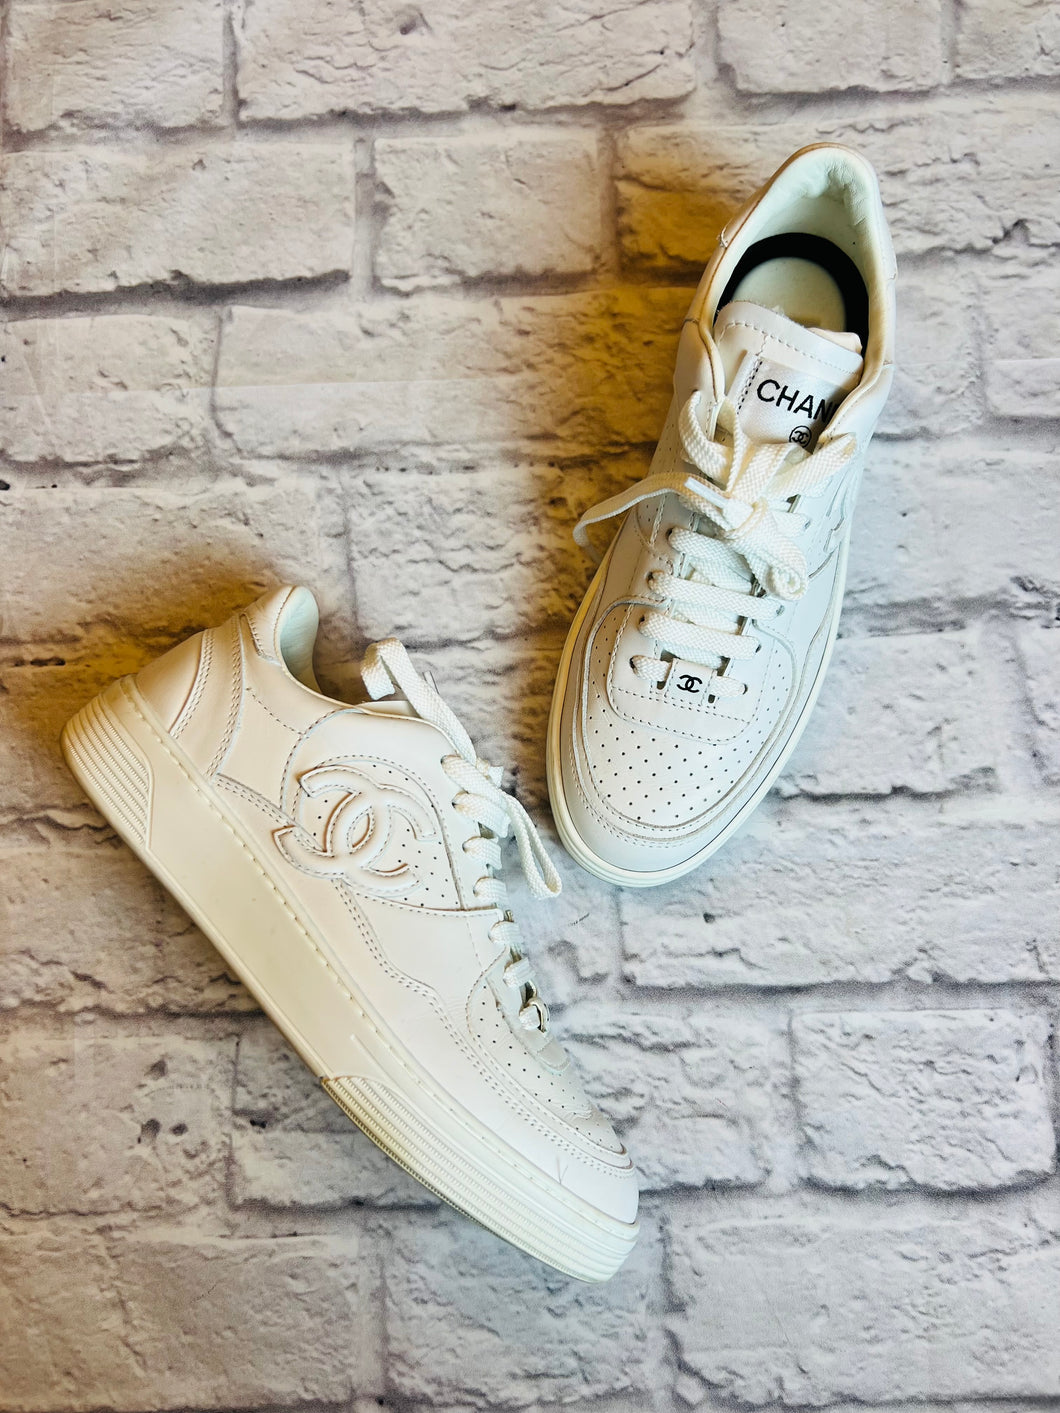 Chanel Low Top Sneakers, Size 37